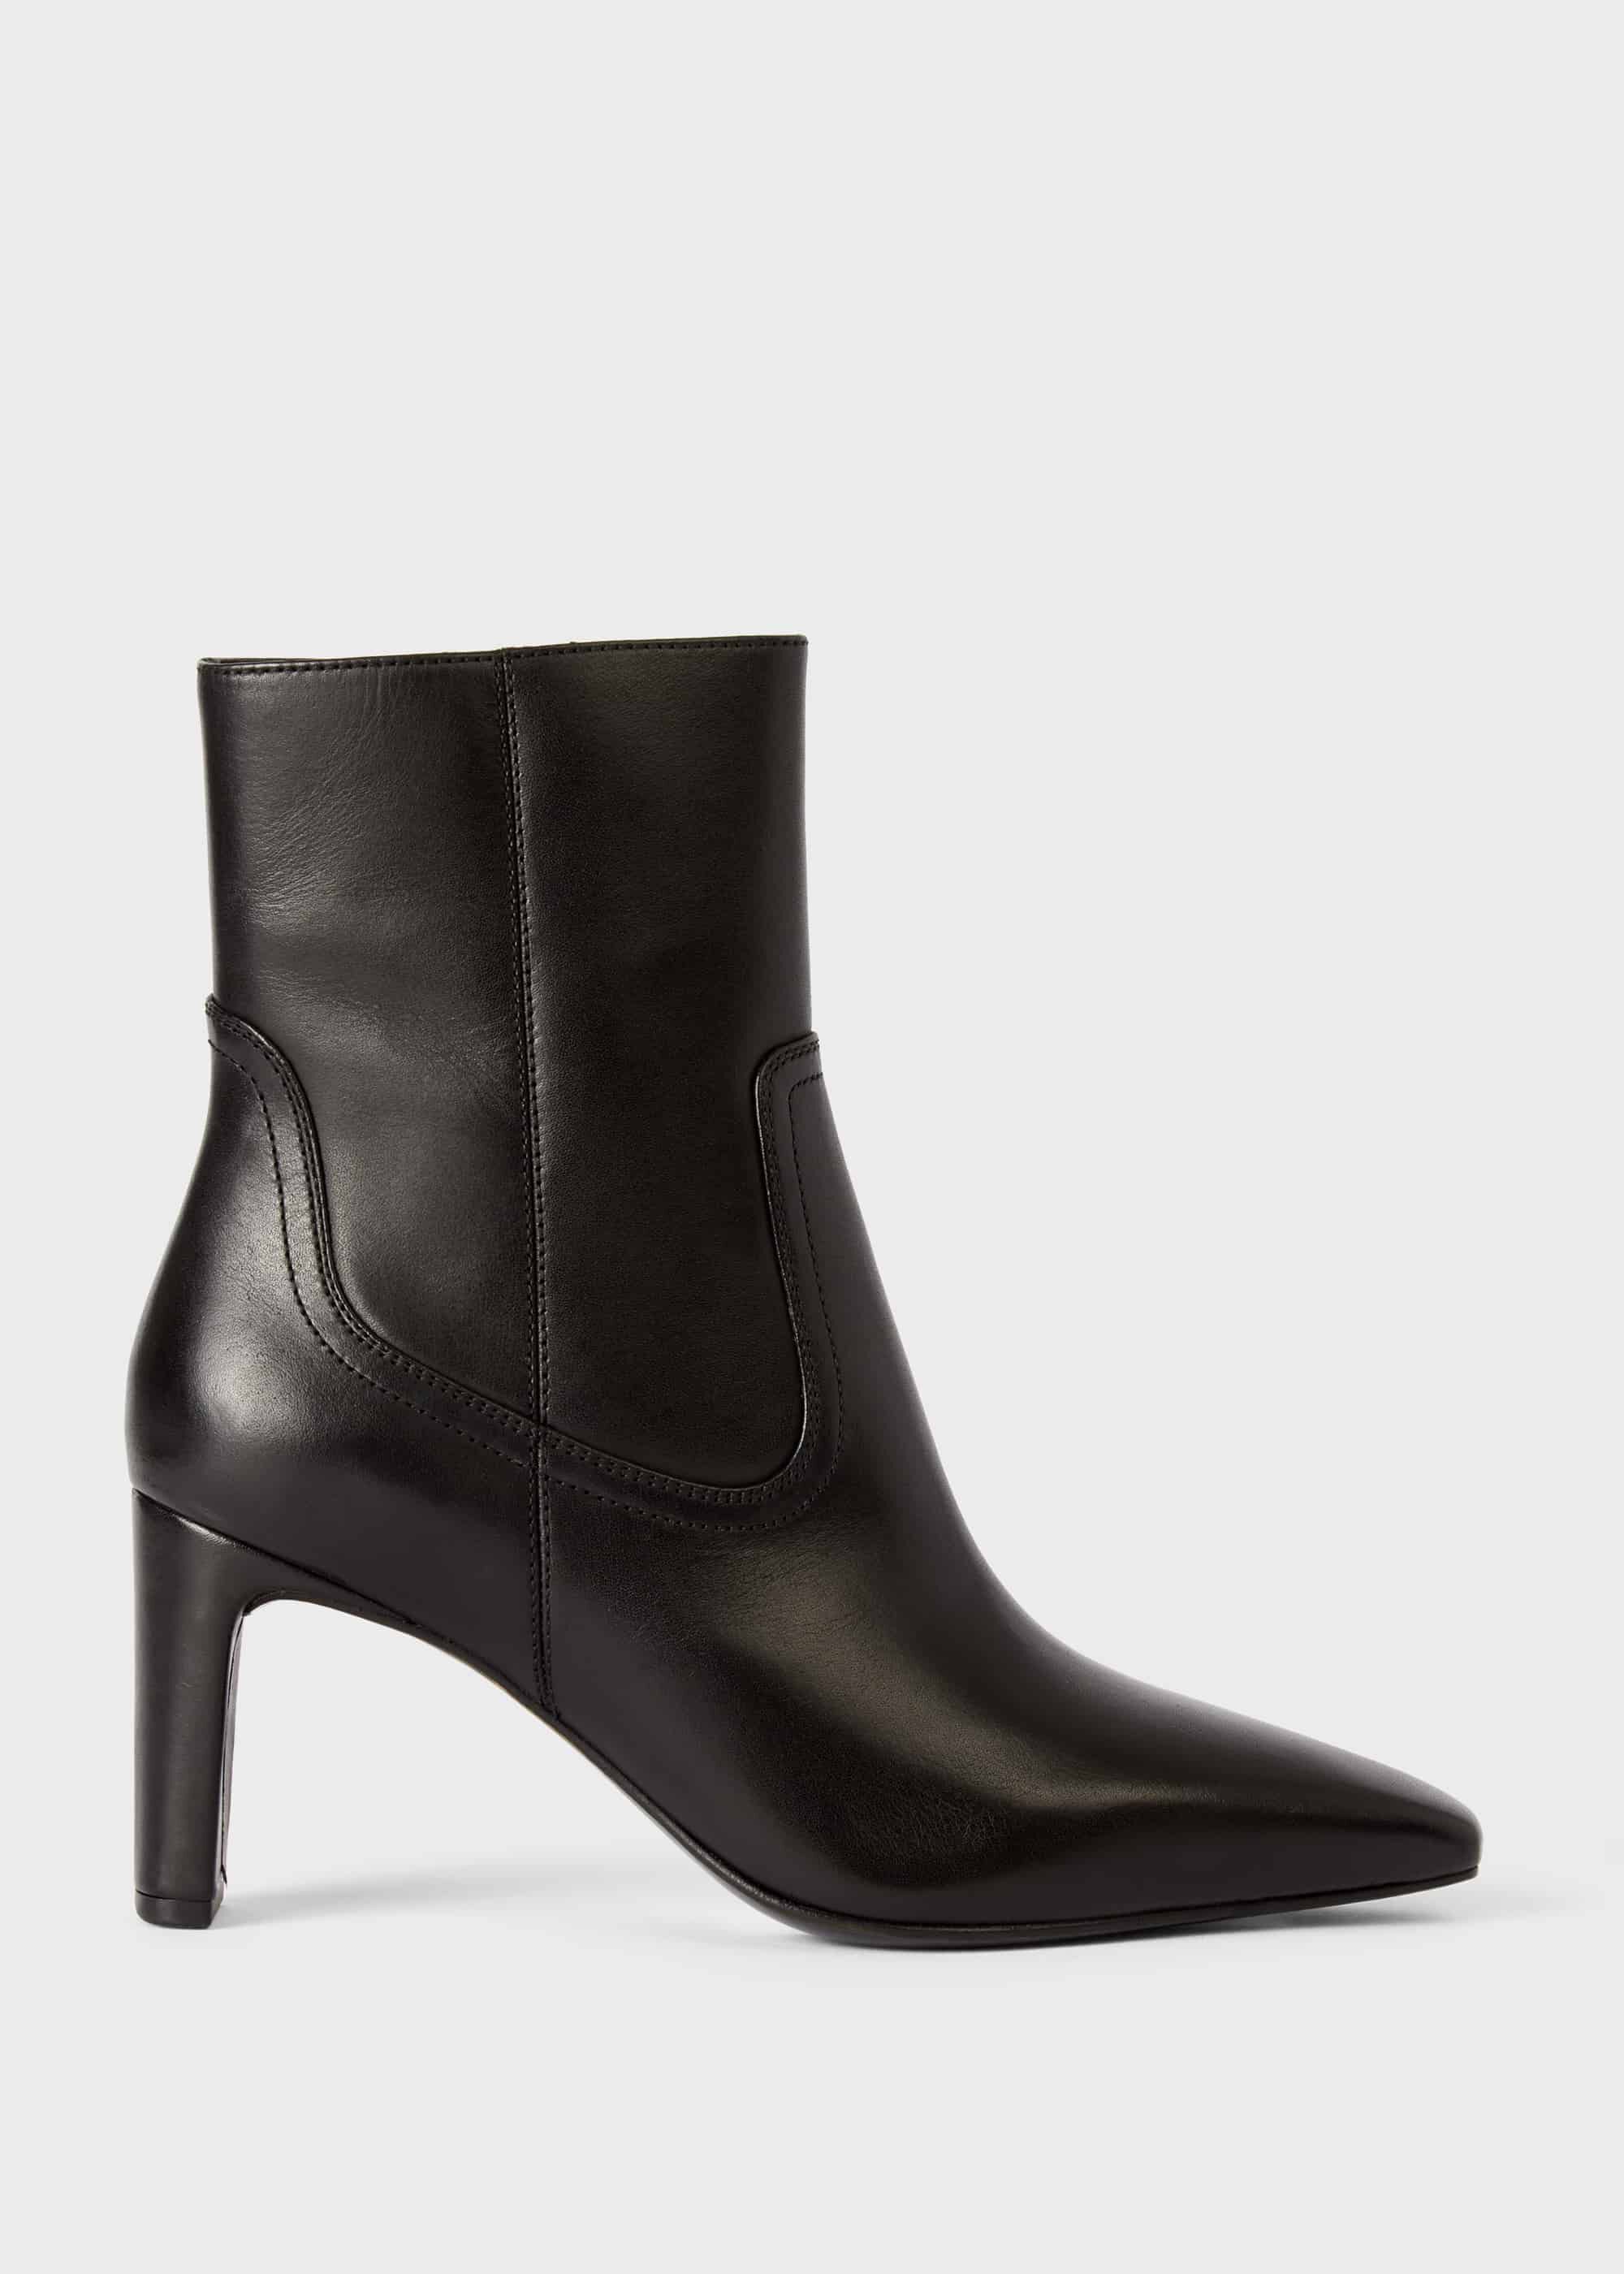 womens ankle boots ireland